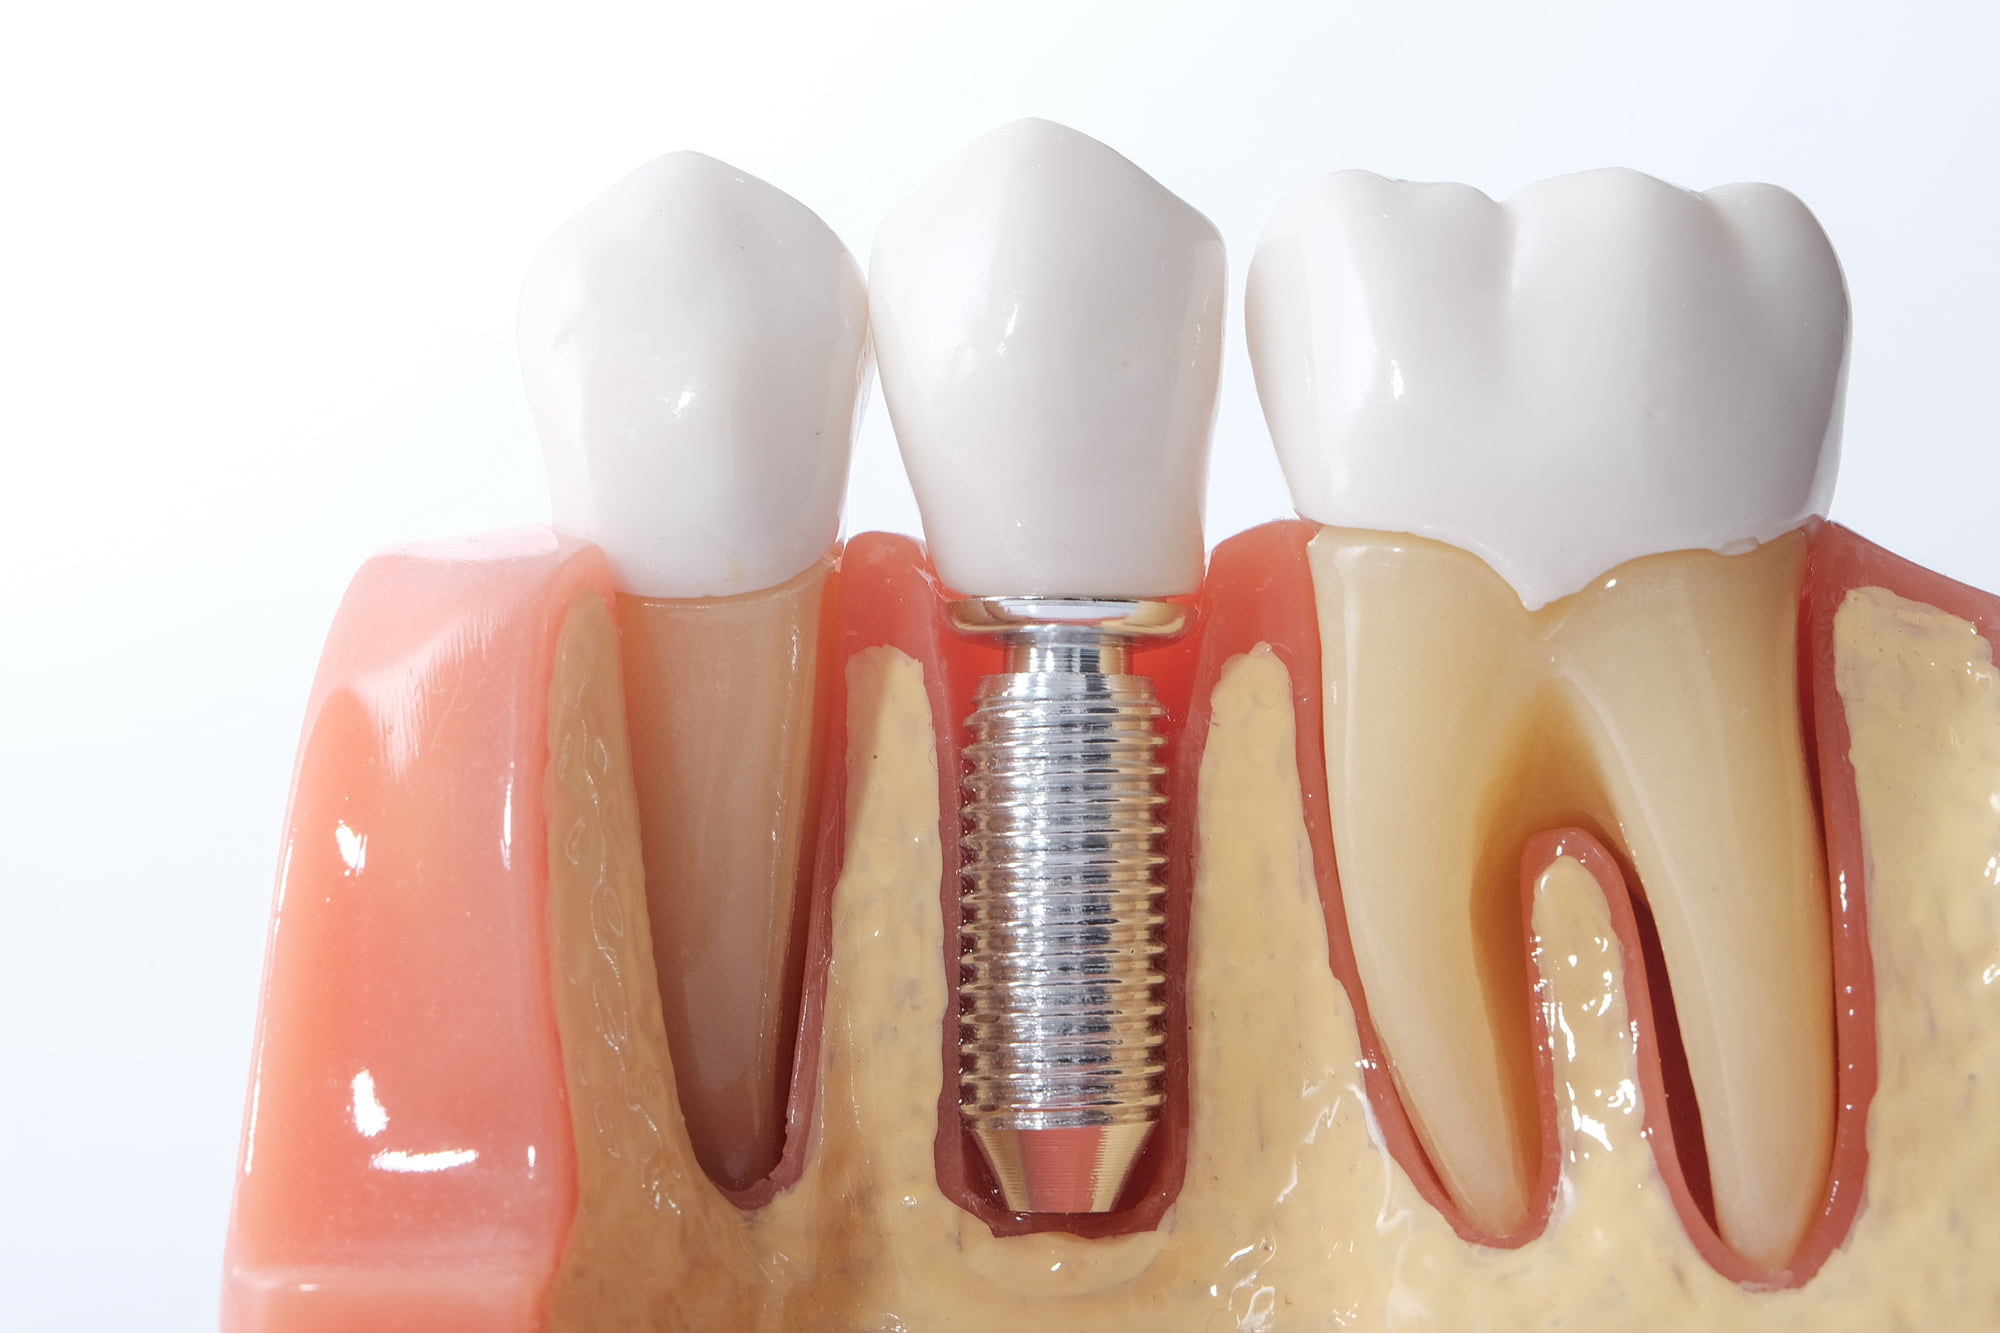 If you have missing teeth, you should consider getting dental implants. This guide breaks down the different benefits of dental implants.